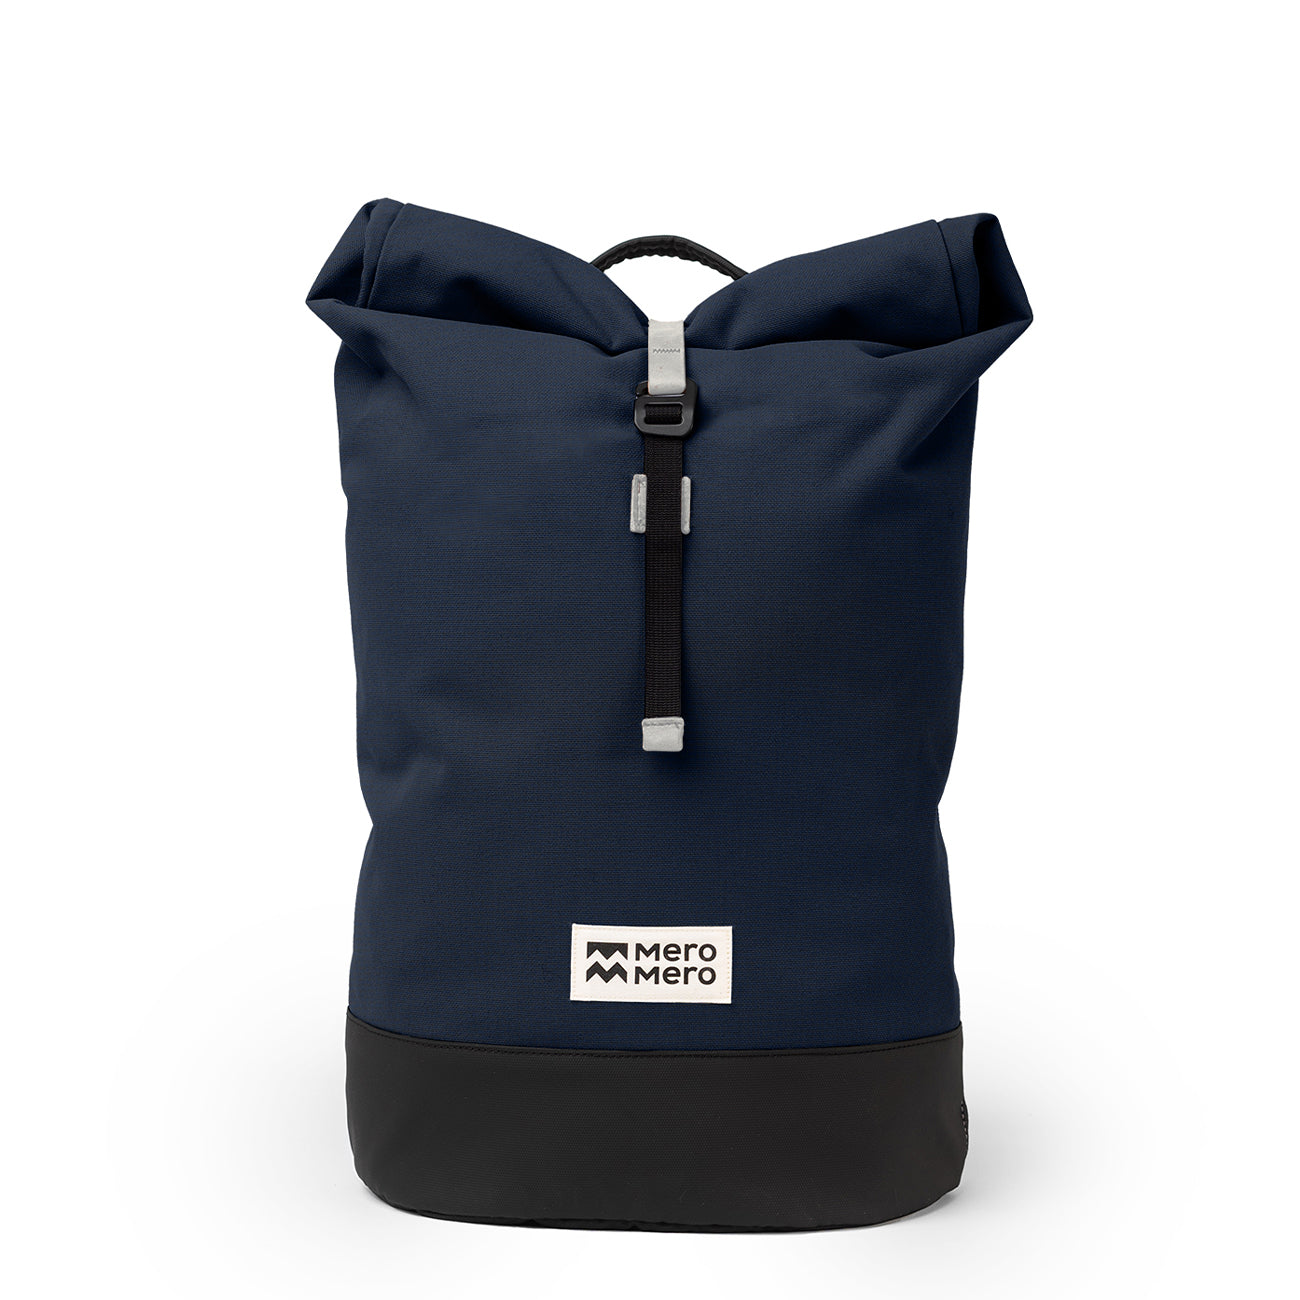 front view of the navy blue eco friendly backpack from mero mero